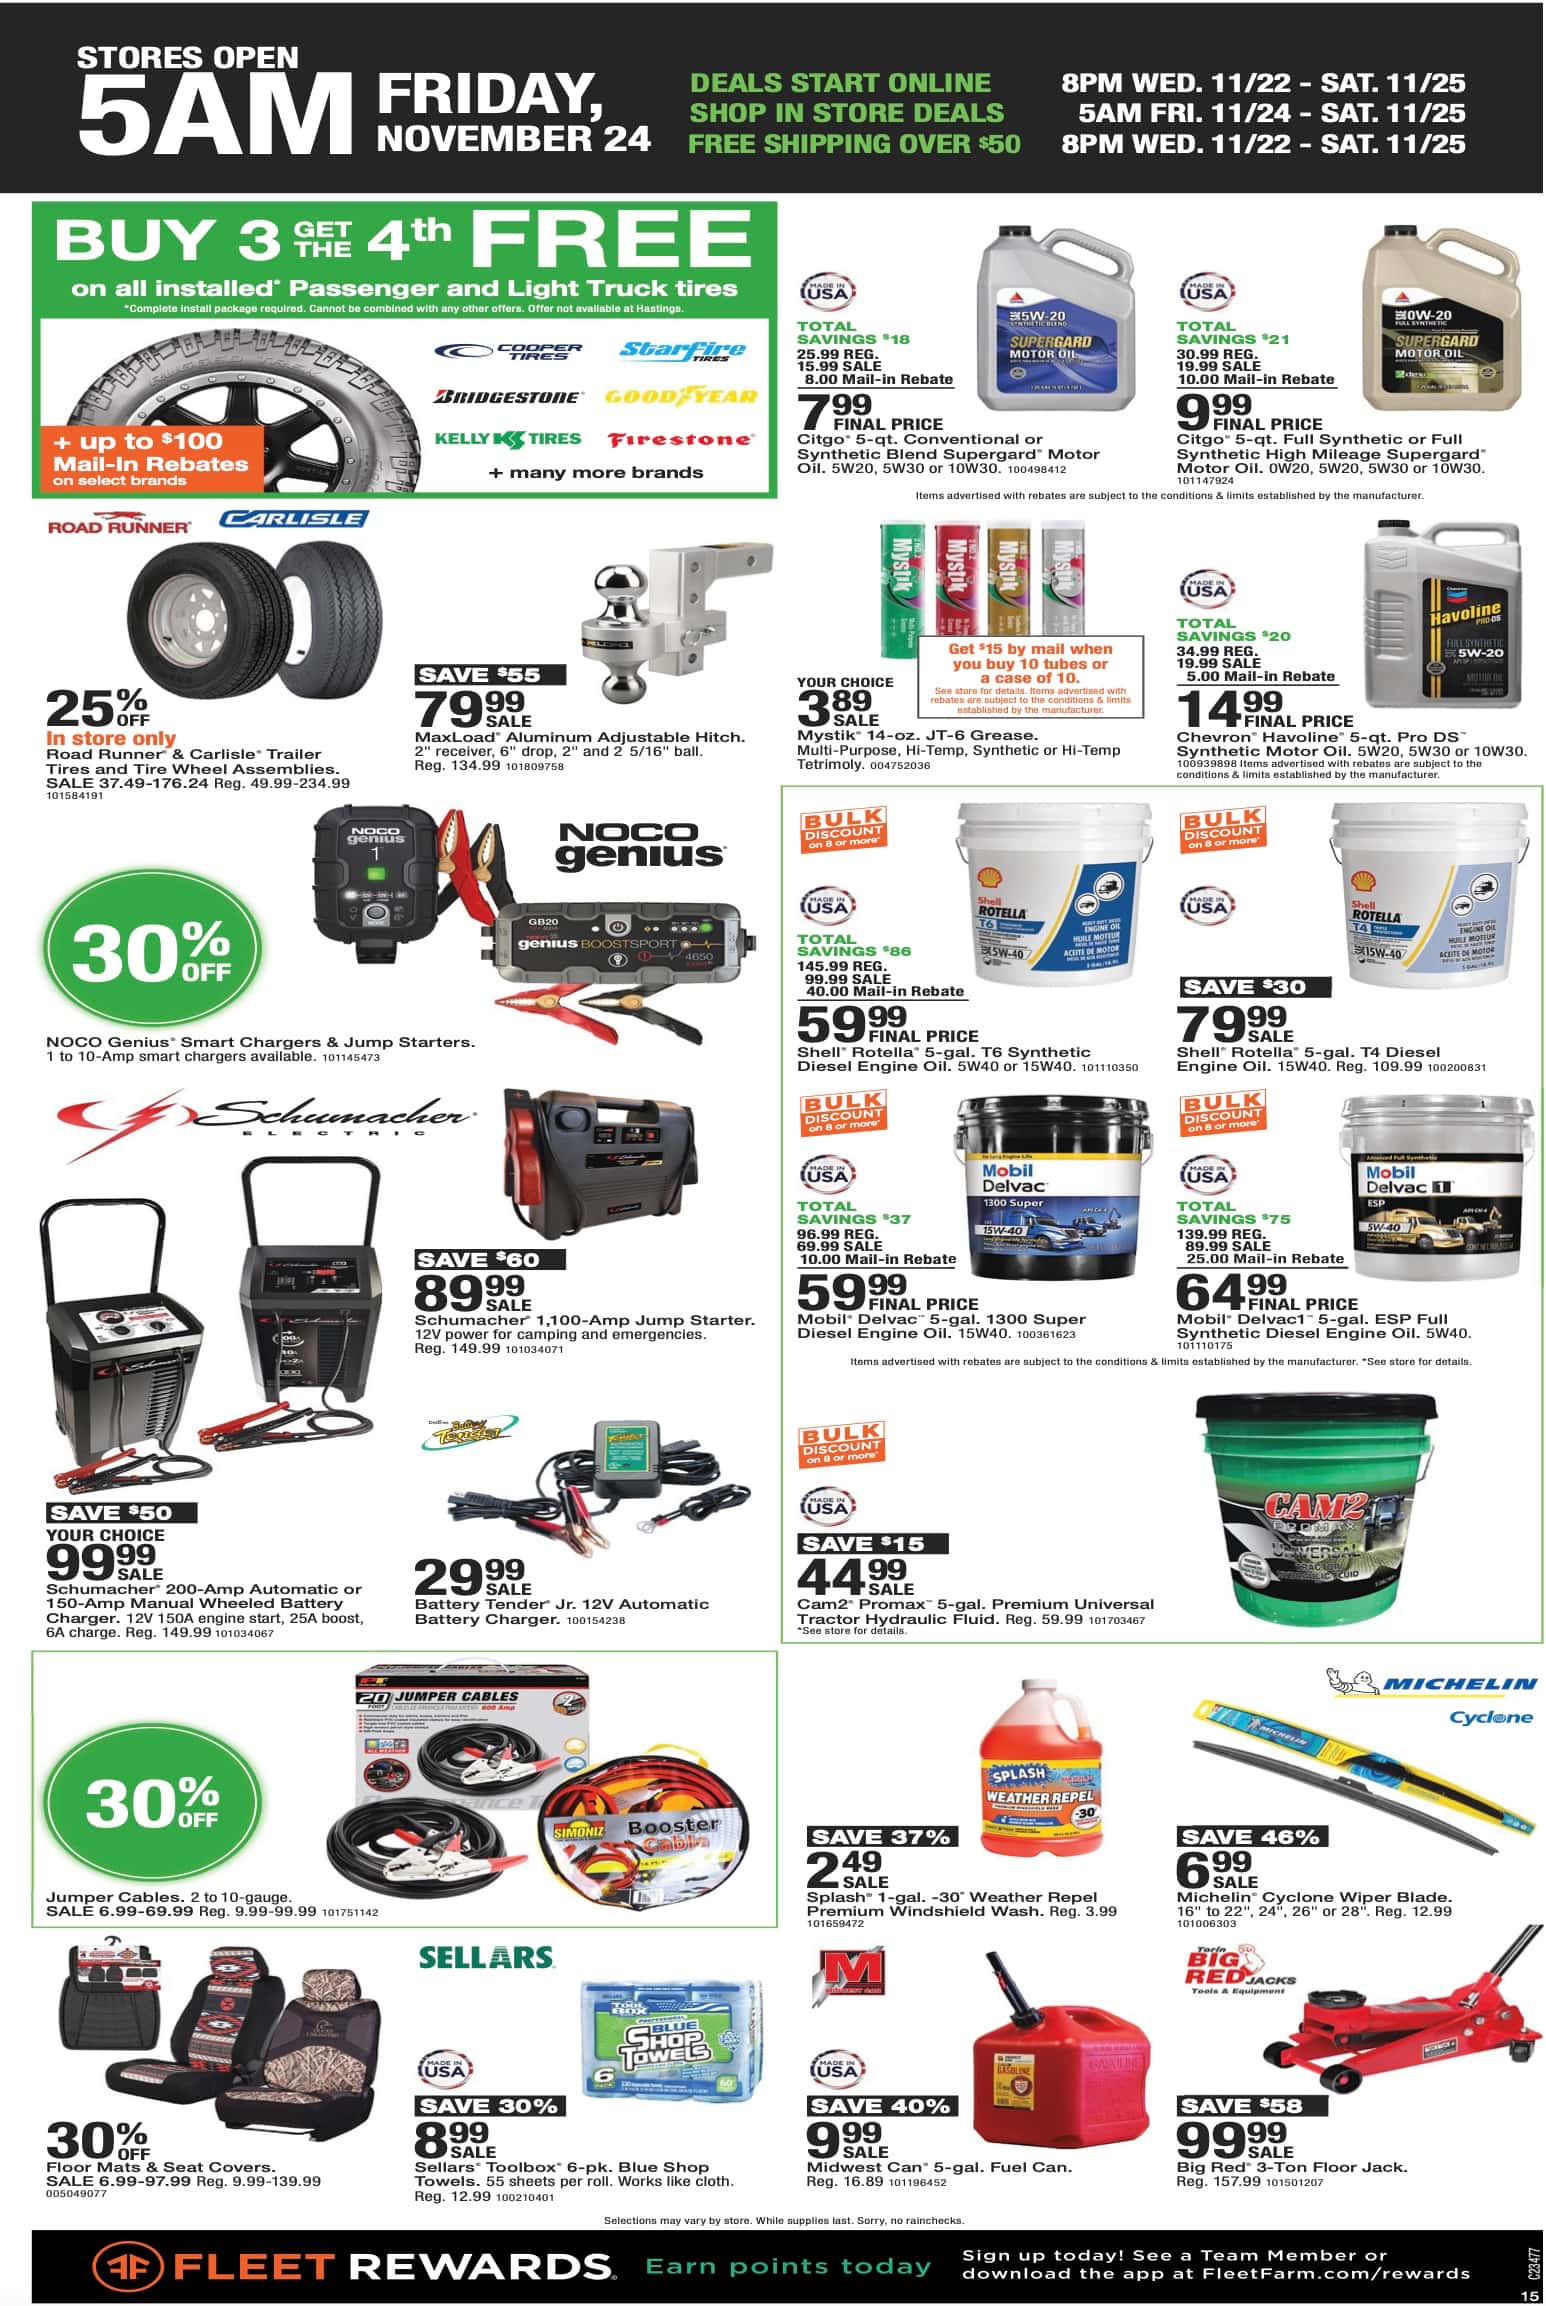 Fleet Farm Black Friday July 2024 Weekly Sales, Deals, Discounts and Digital Coupons.